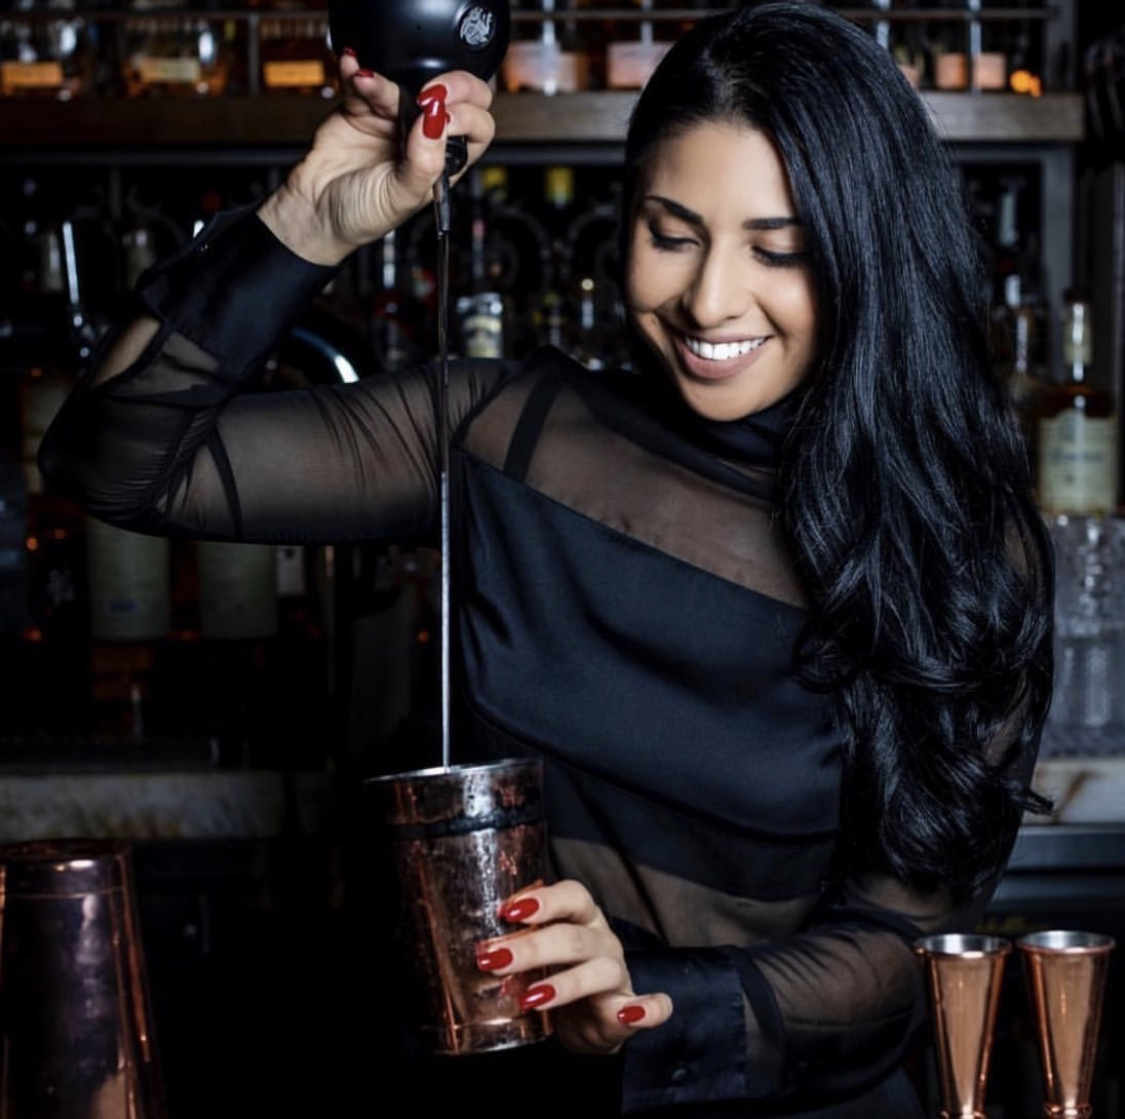 Read more about the article Nightlife Etiquette: How To Treat a Bartender, According To These Bartenders